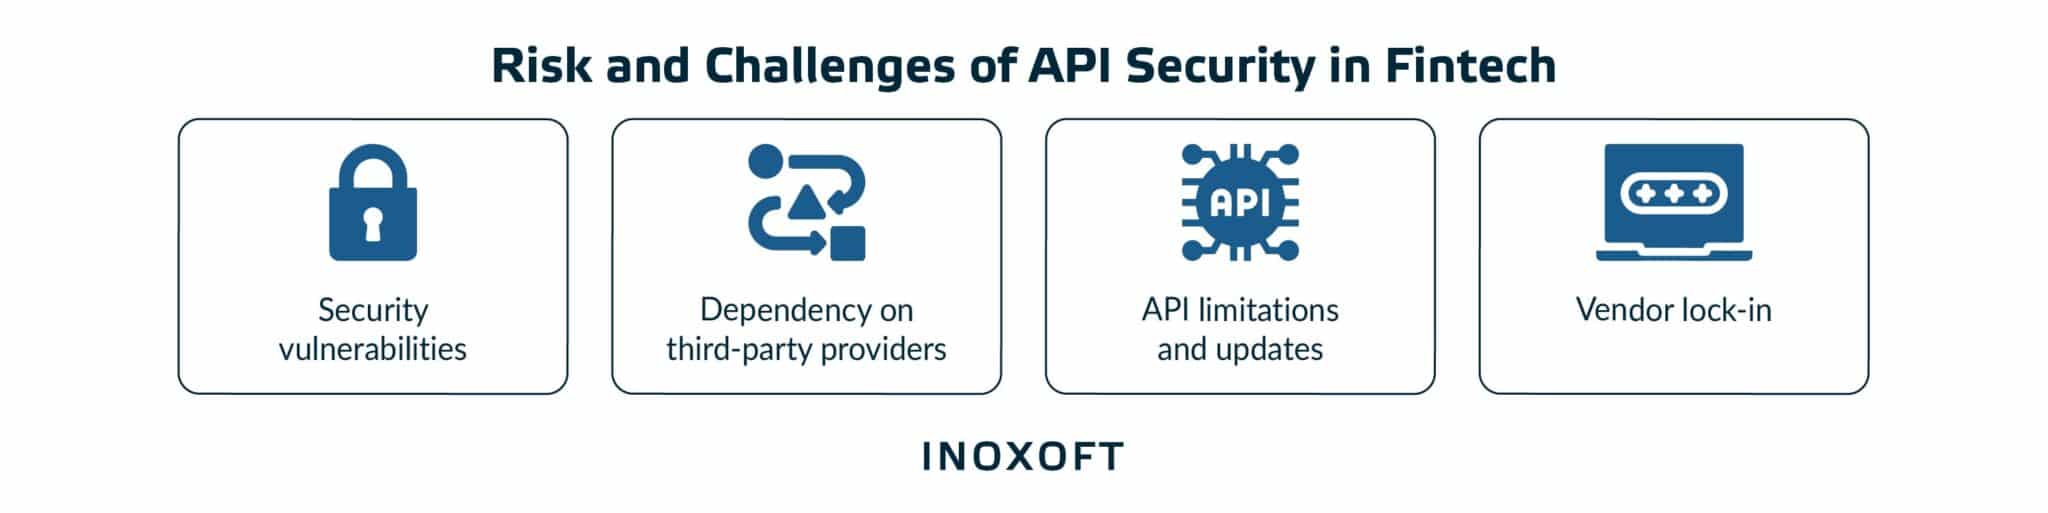 Cons and Risks of Fintech APIs